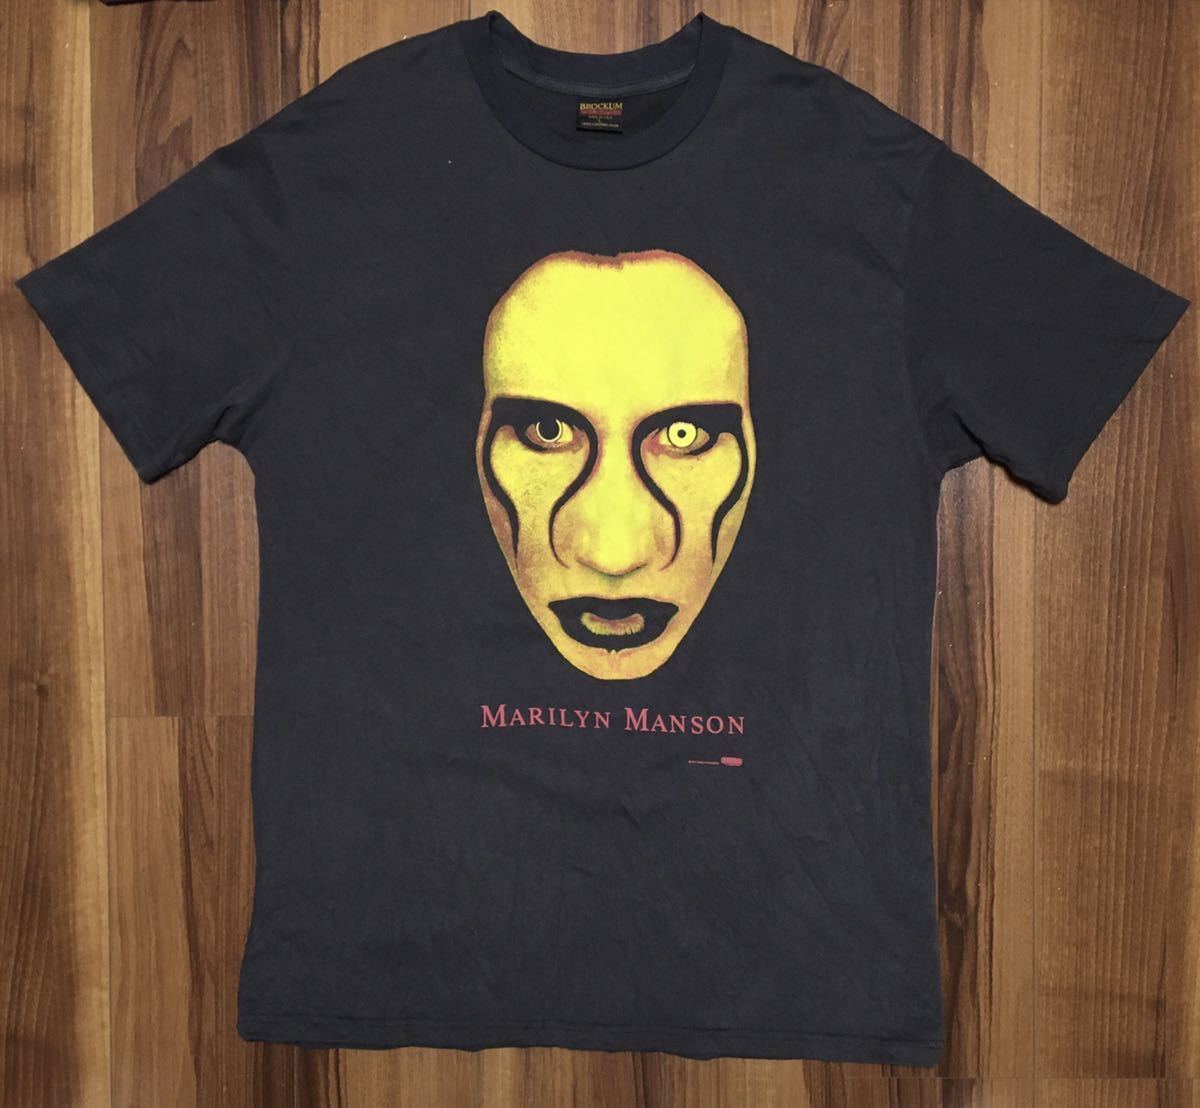 80s 90s バンド Tシャツ USA製 Band Tee Marilyn Manson t shirt made